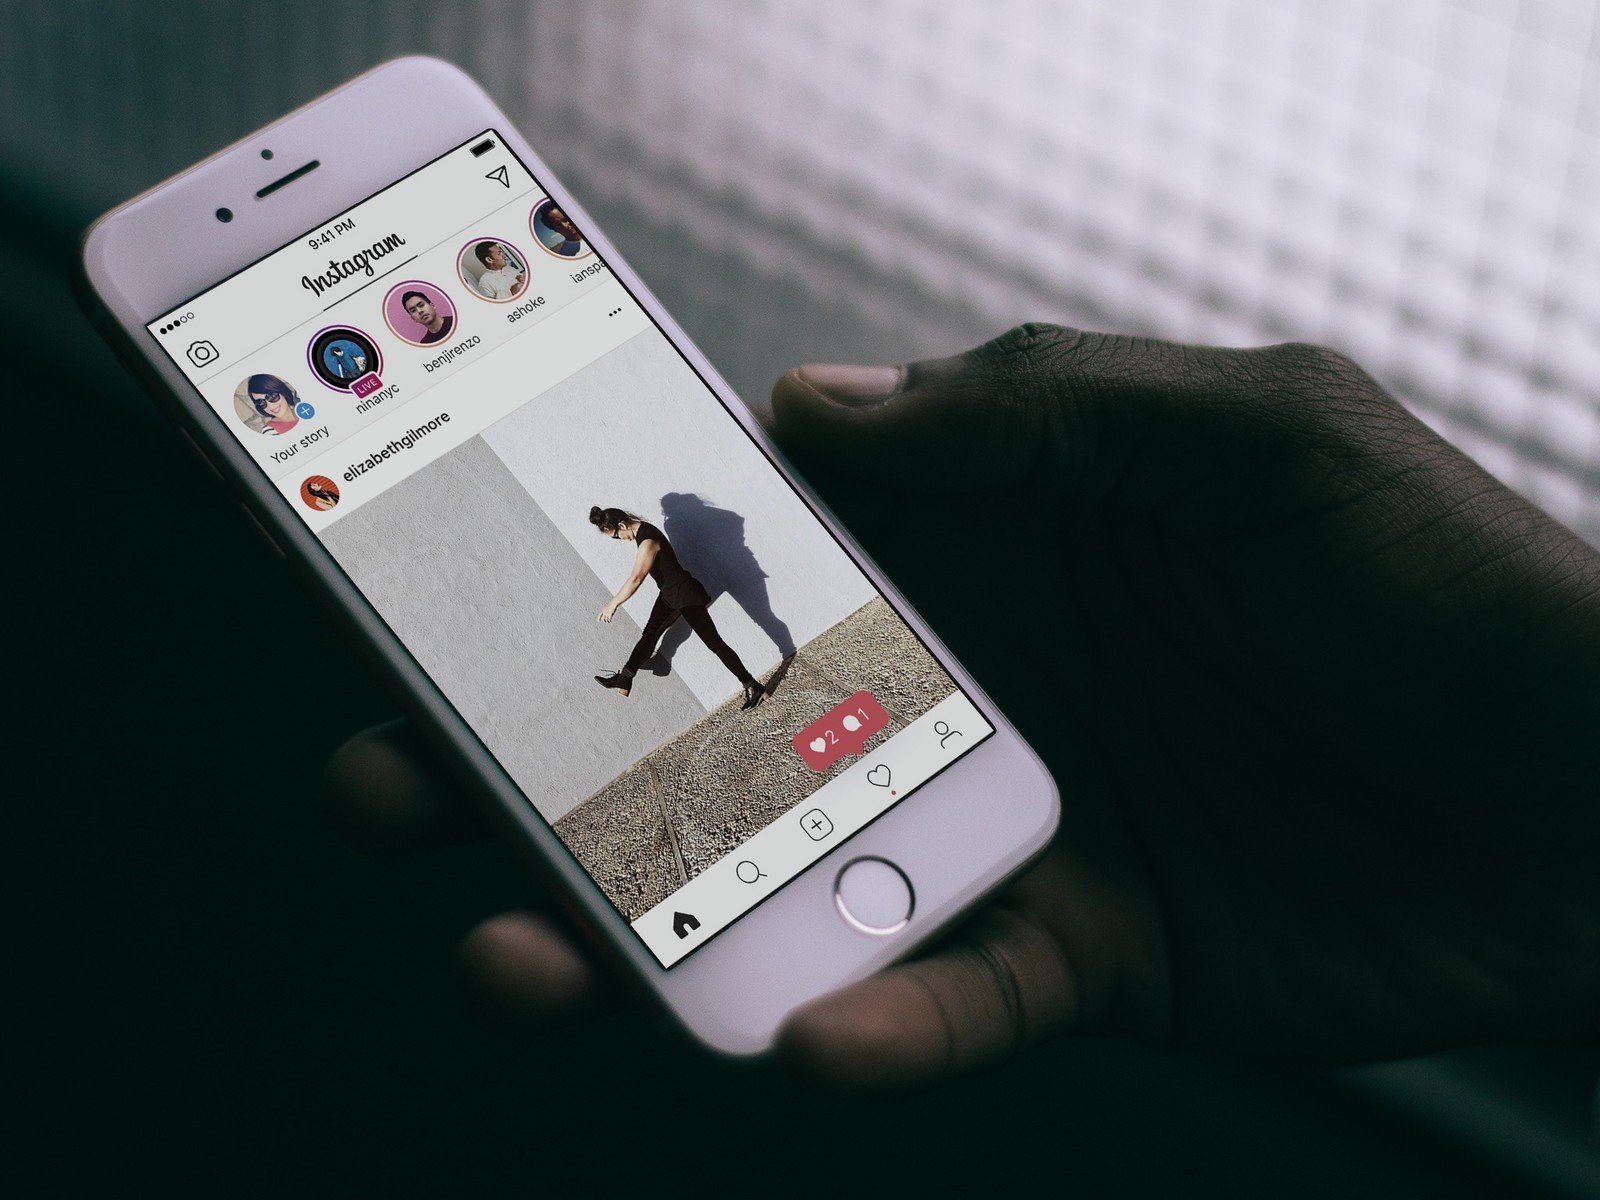 How to hide photos on Instagram without deleting them